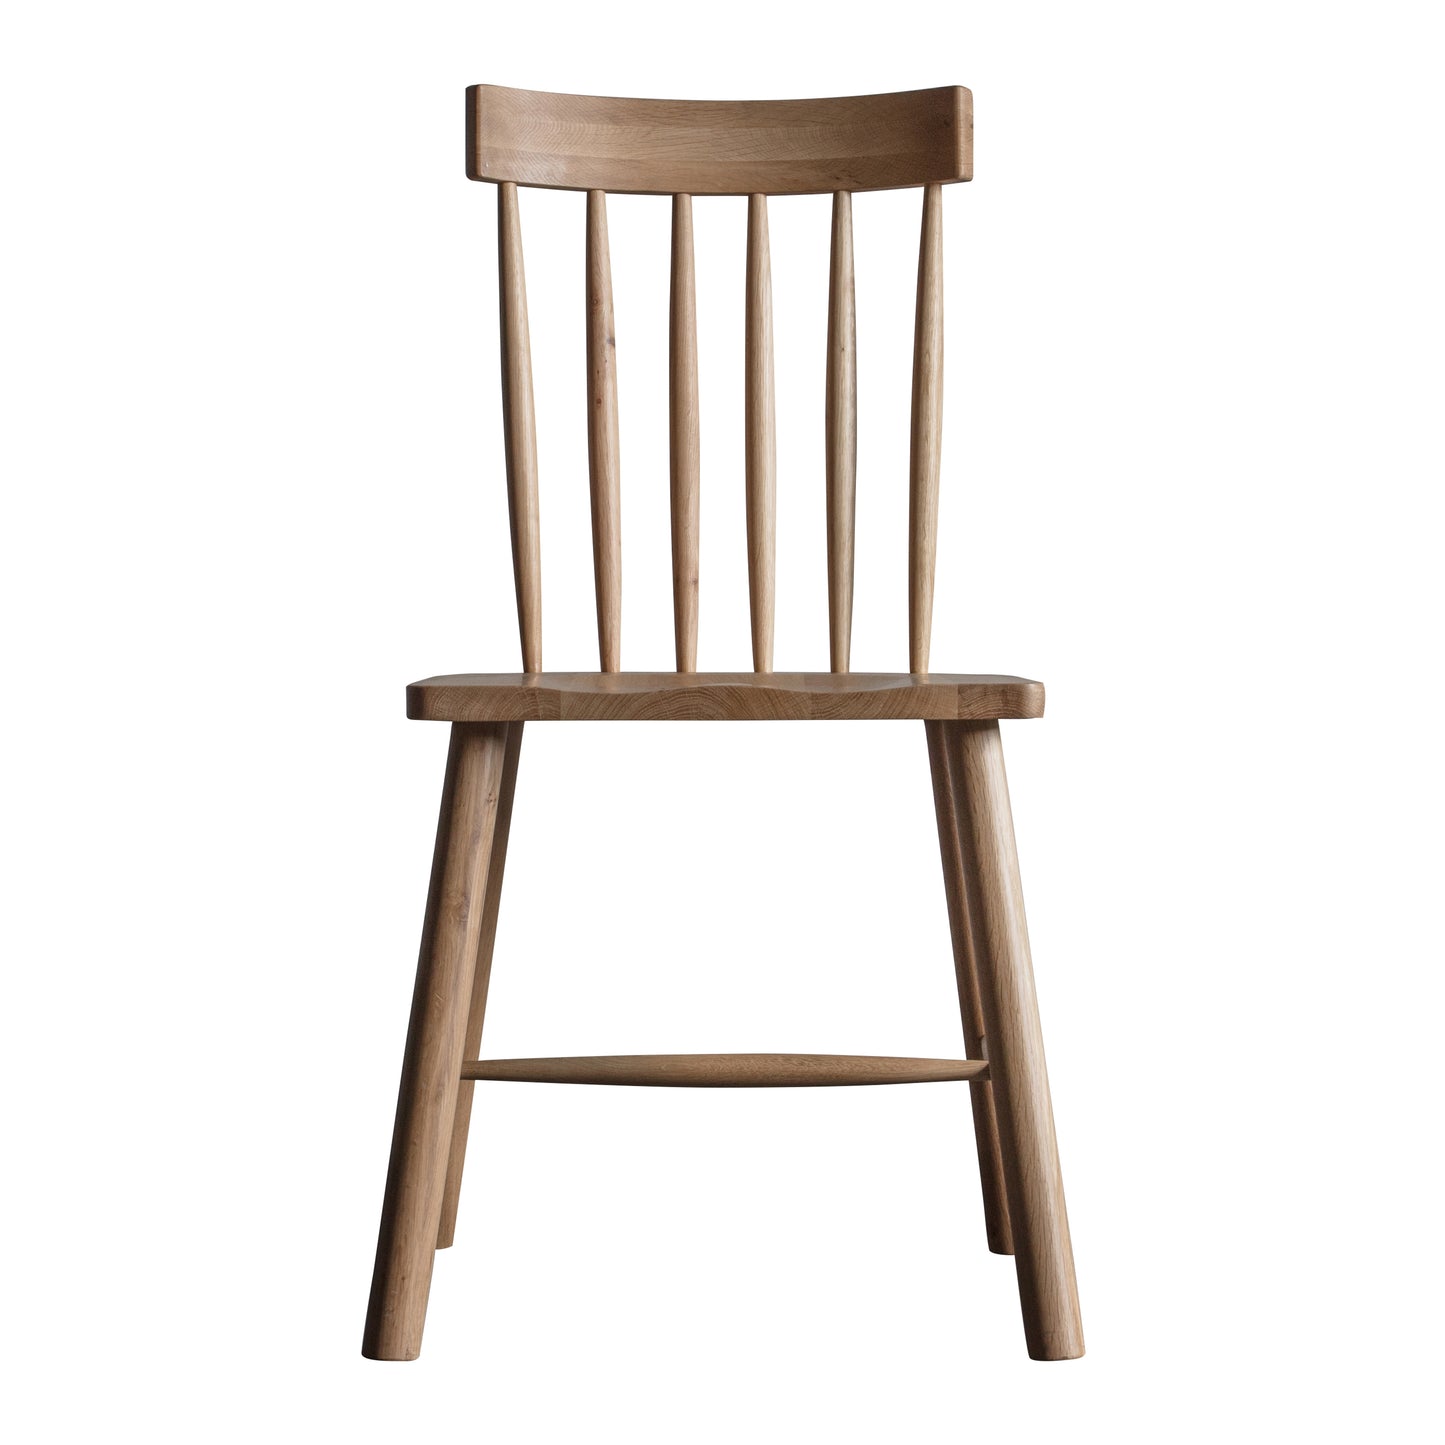 A Wembury Dining Chair 450x460x920mm (2pk) by Kikiathome.co.uk, perfect for interior decor, showcased on a white background.